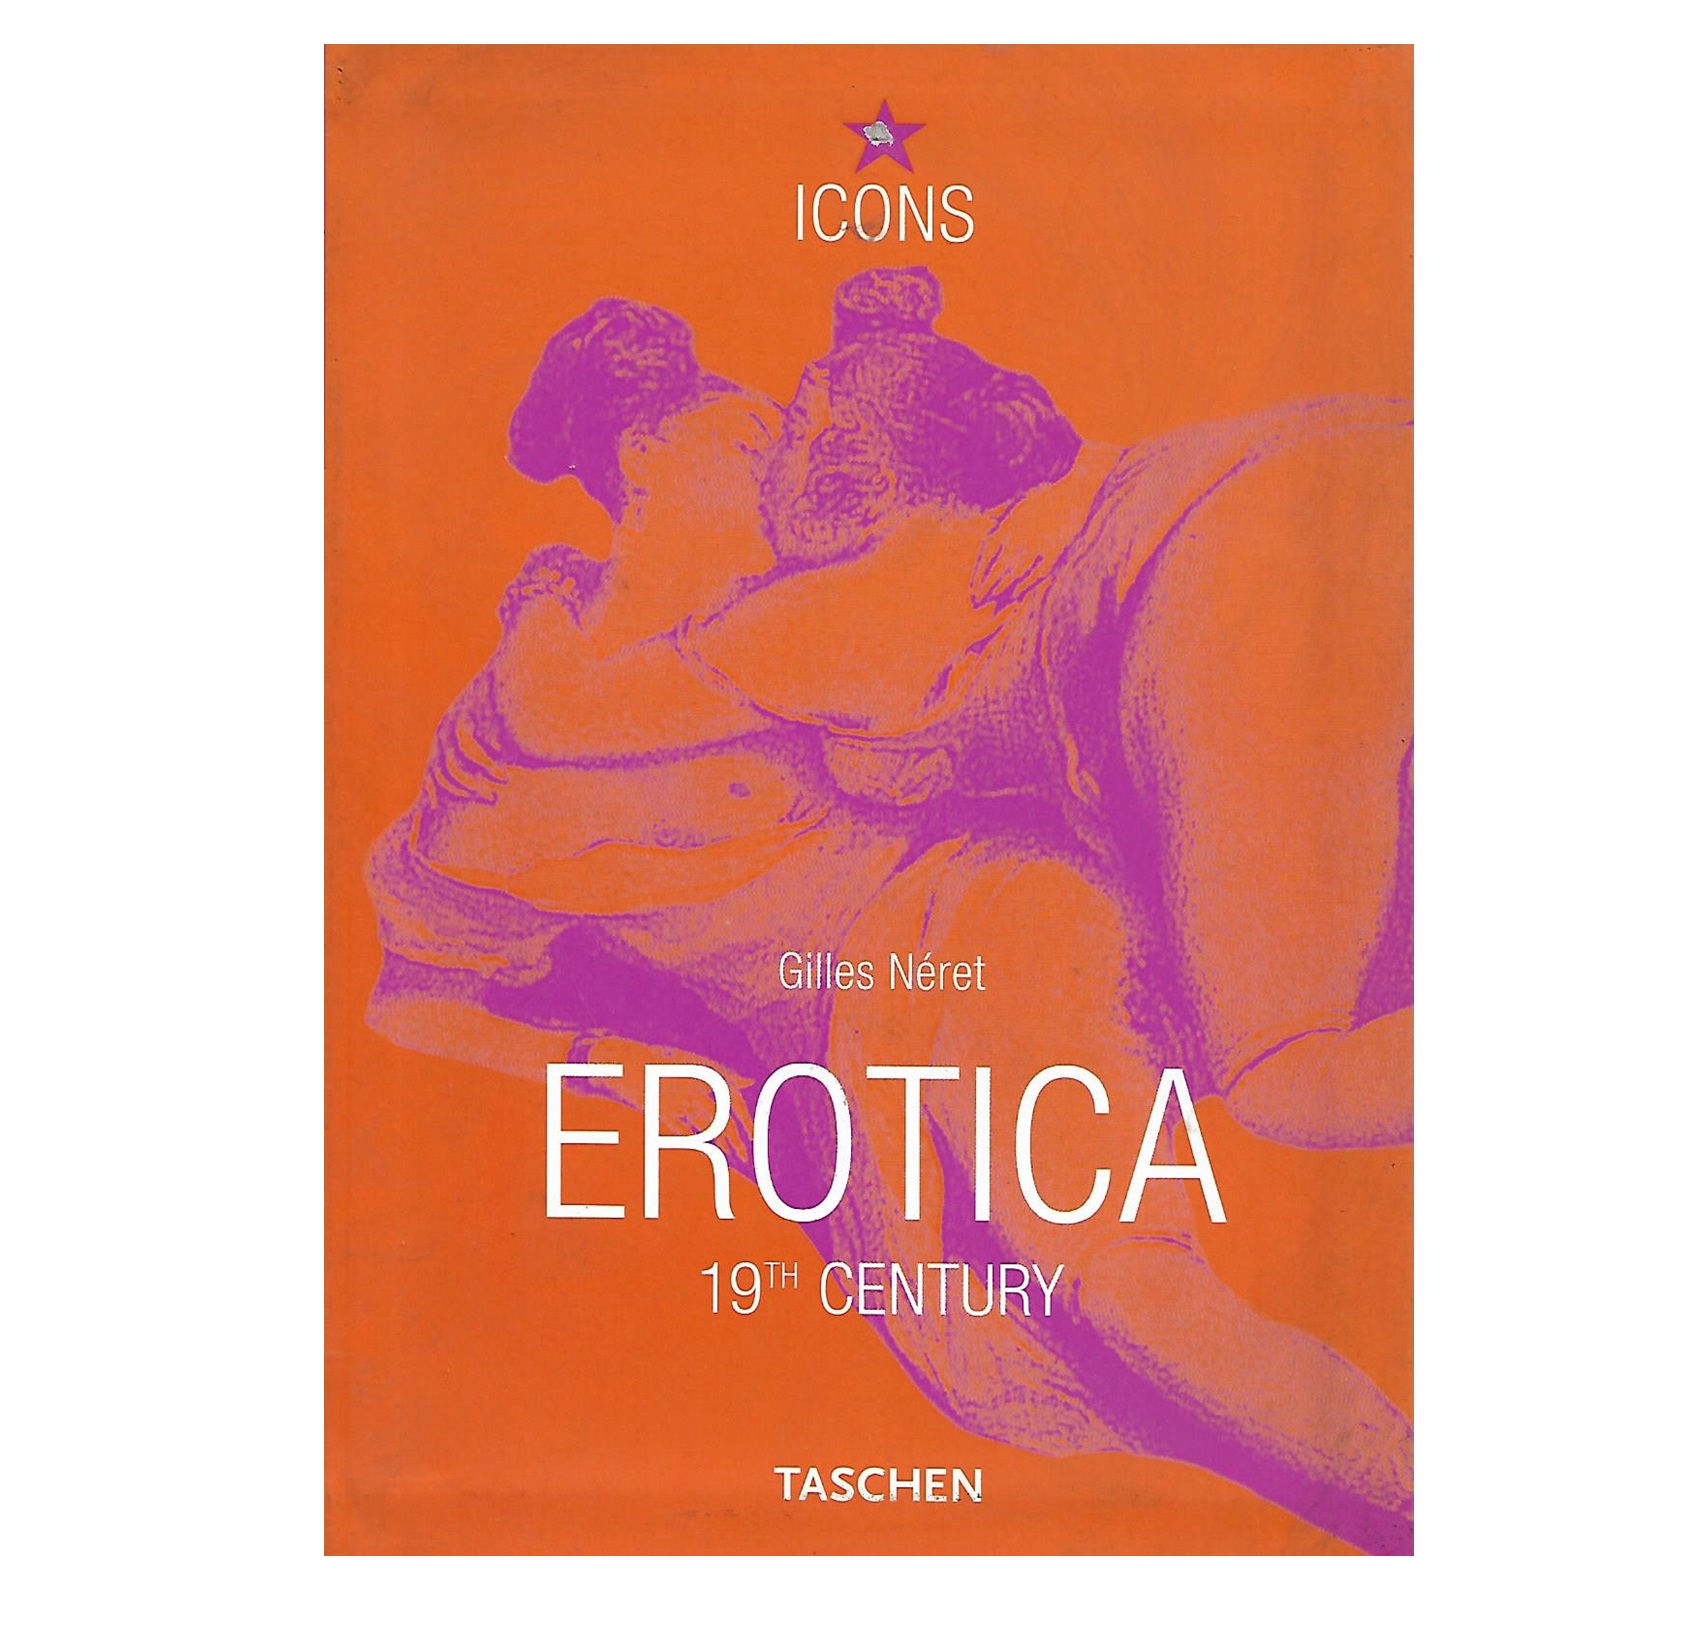 EROTICA: 19TH CENTURY FROM COURBET TO GAUGUIN